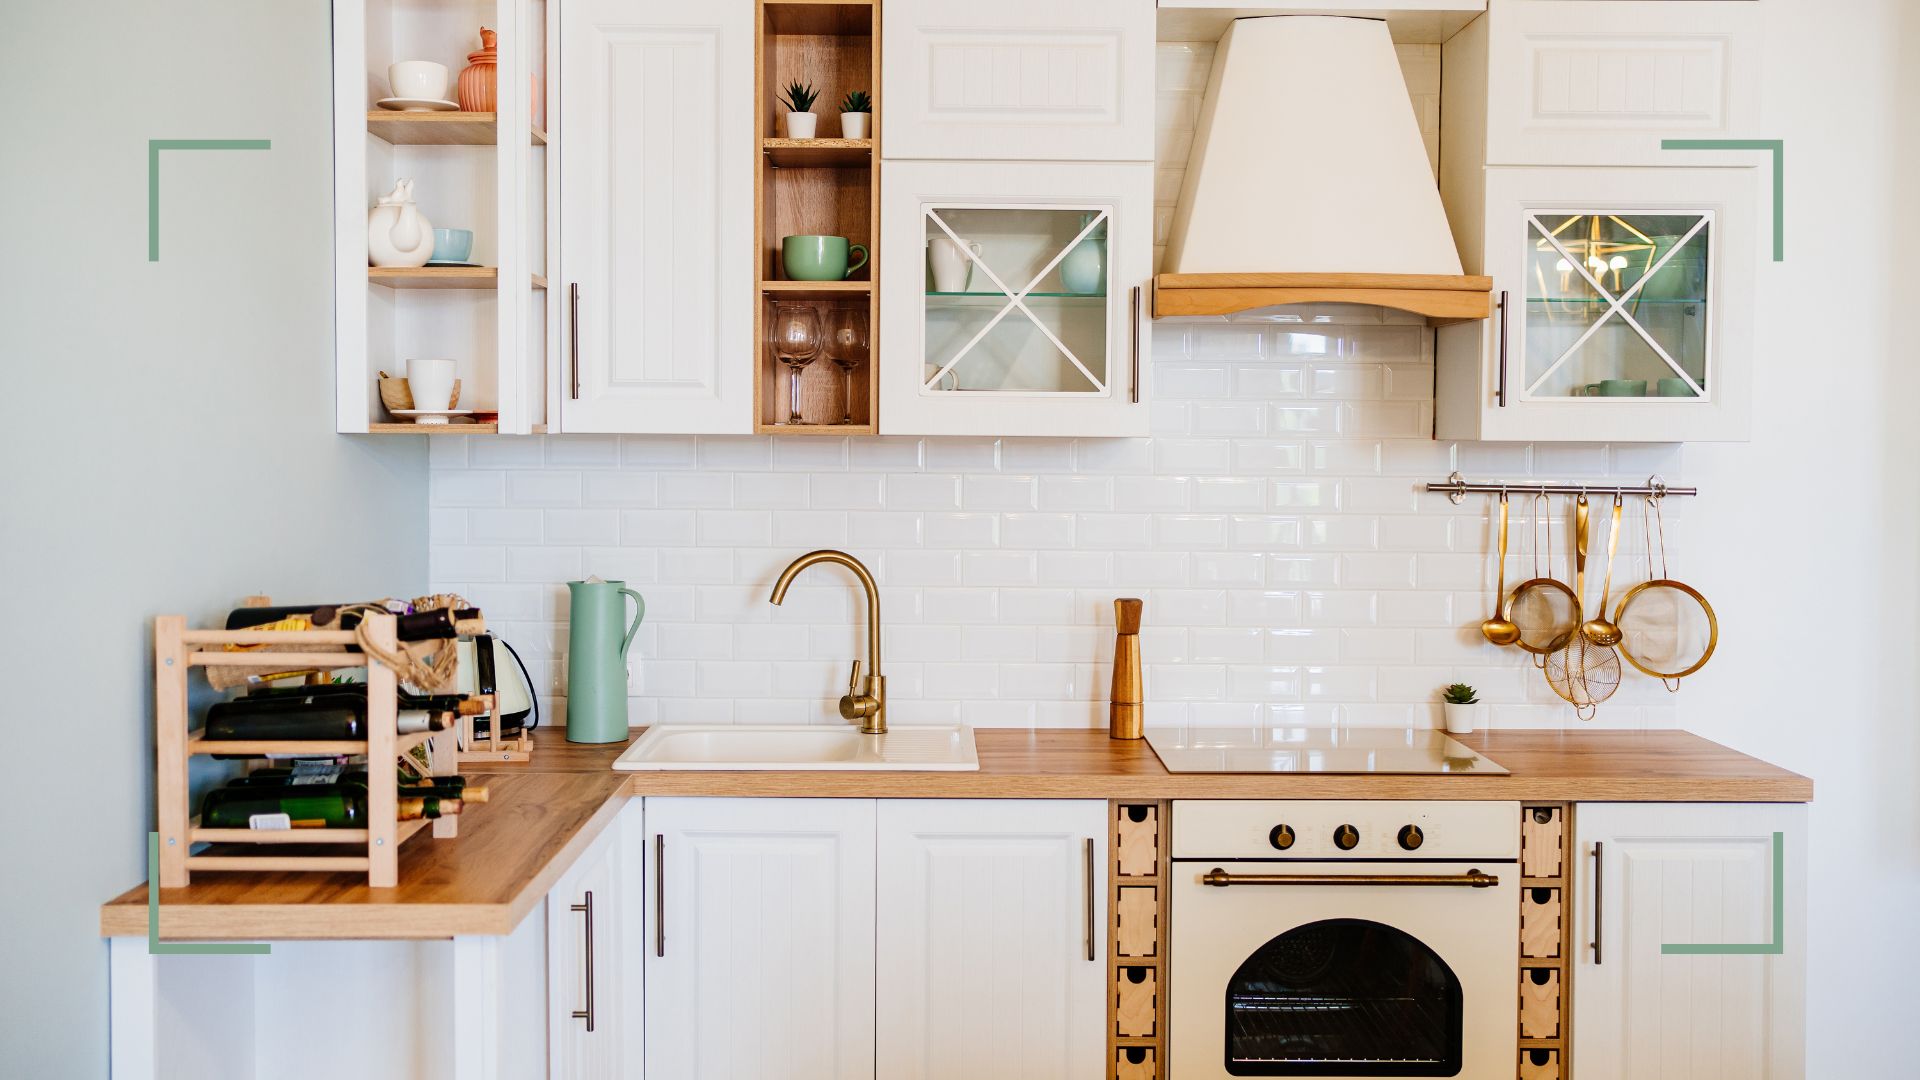 25 Smart Small Pantry Ideas to Maximize Your Kitchen Storage Space